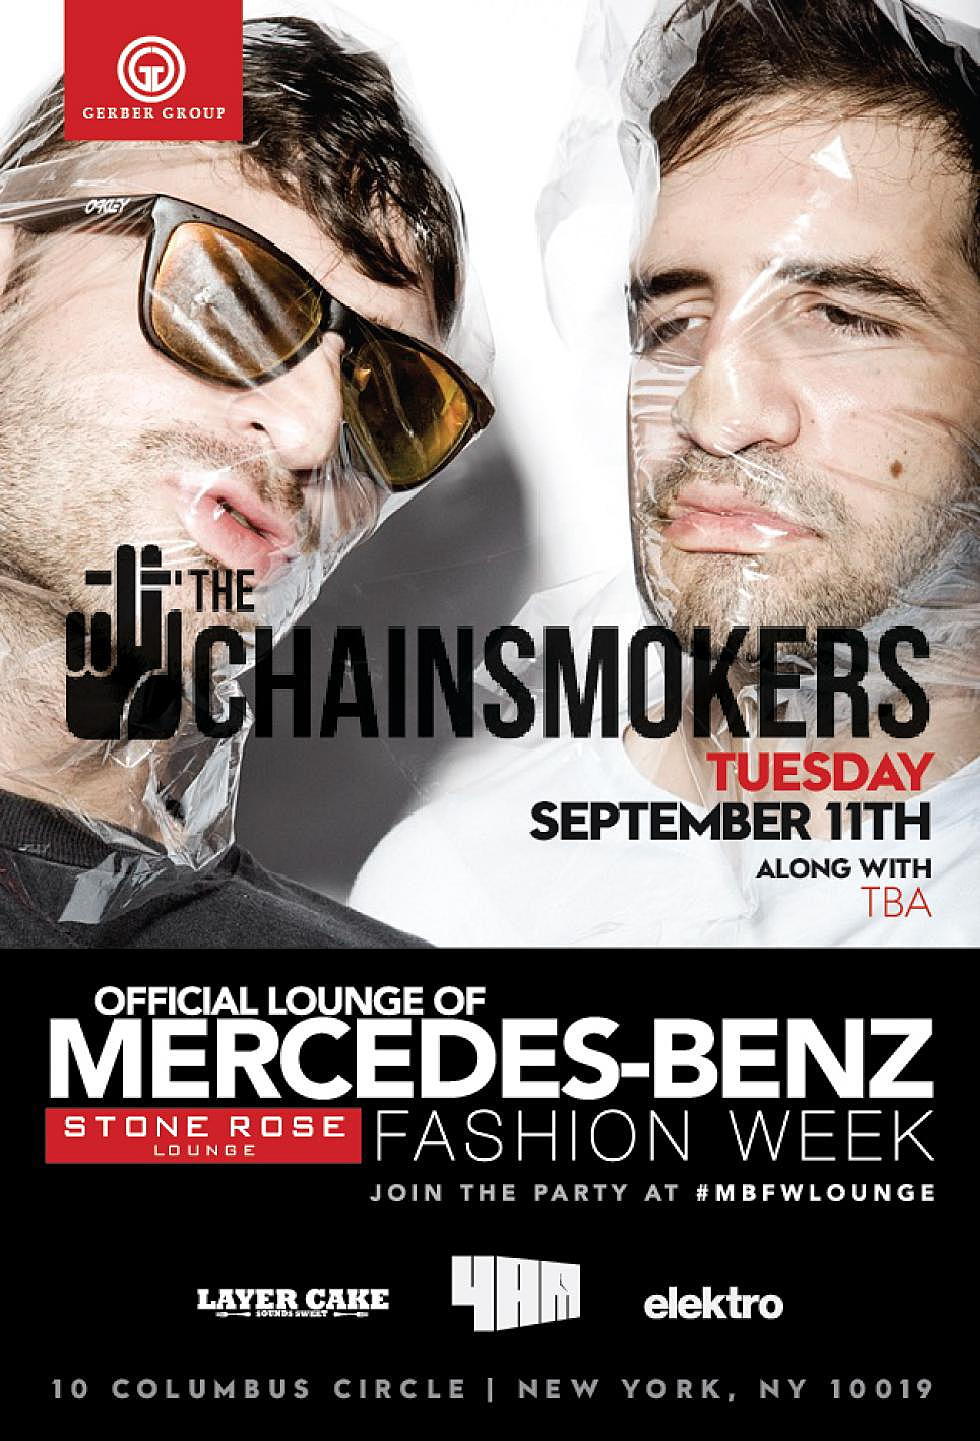 Quickie with a DJ Mercedes-Benz Fashion Week Edition: The Chainsmokers